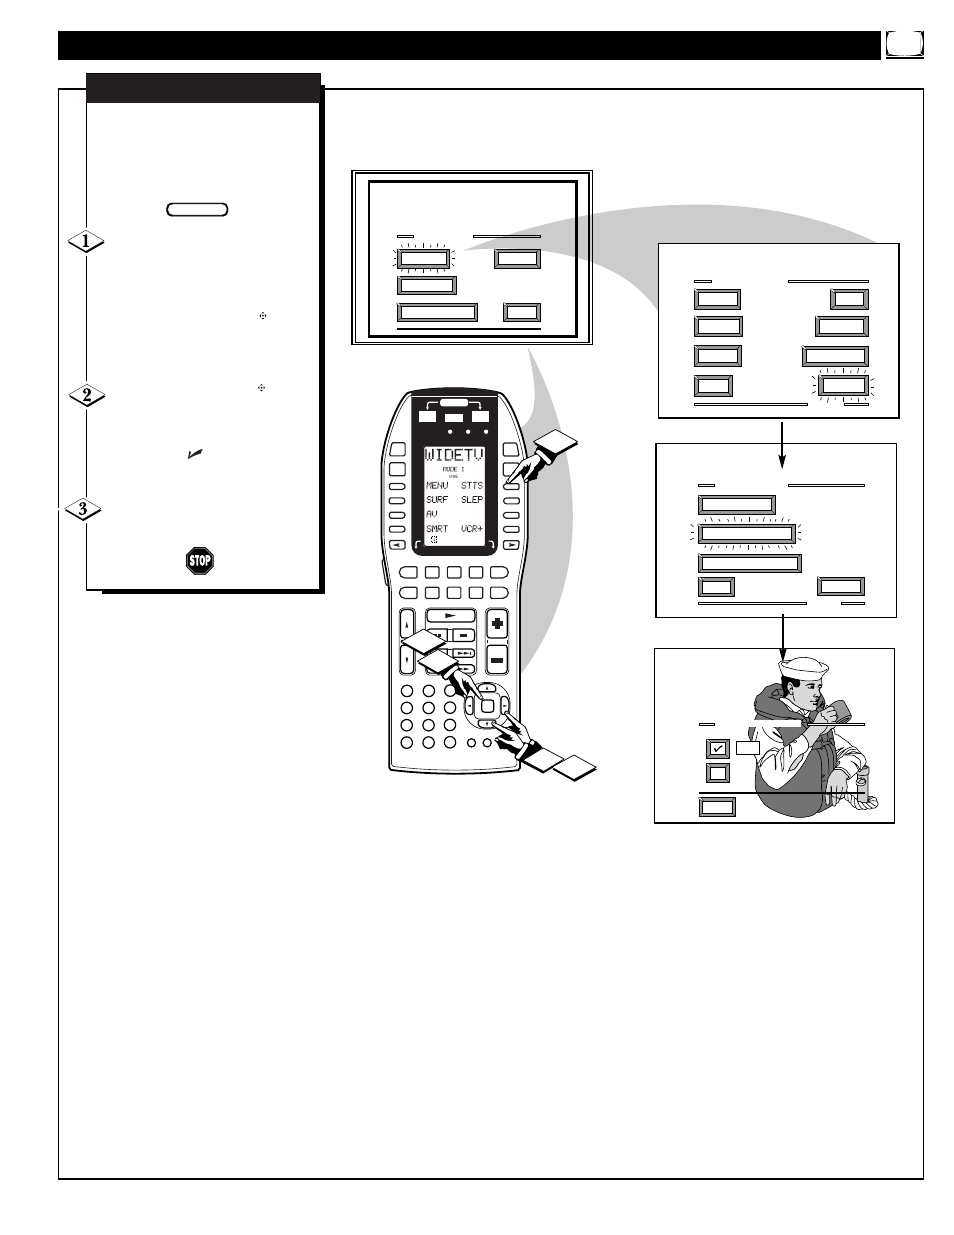 Icture, Ontrols, Continued | Marantz PV5580 User Manual | Page 9 / 56